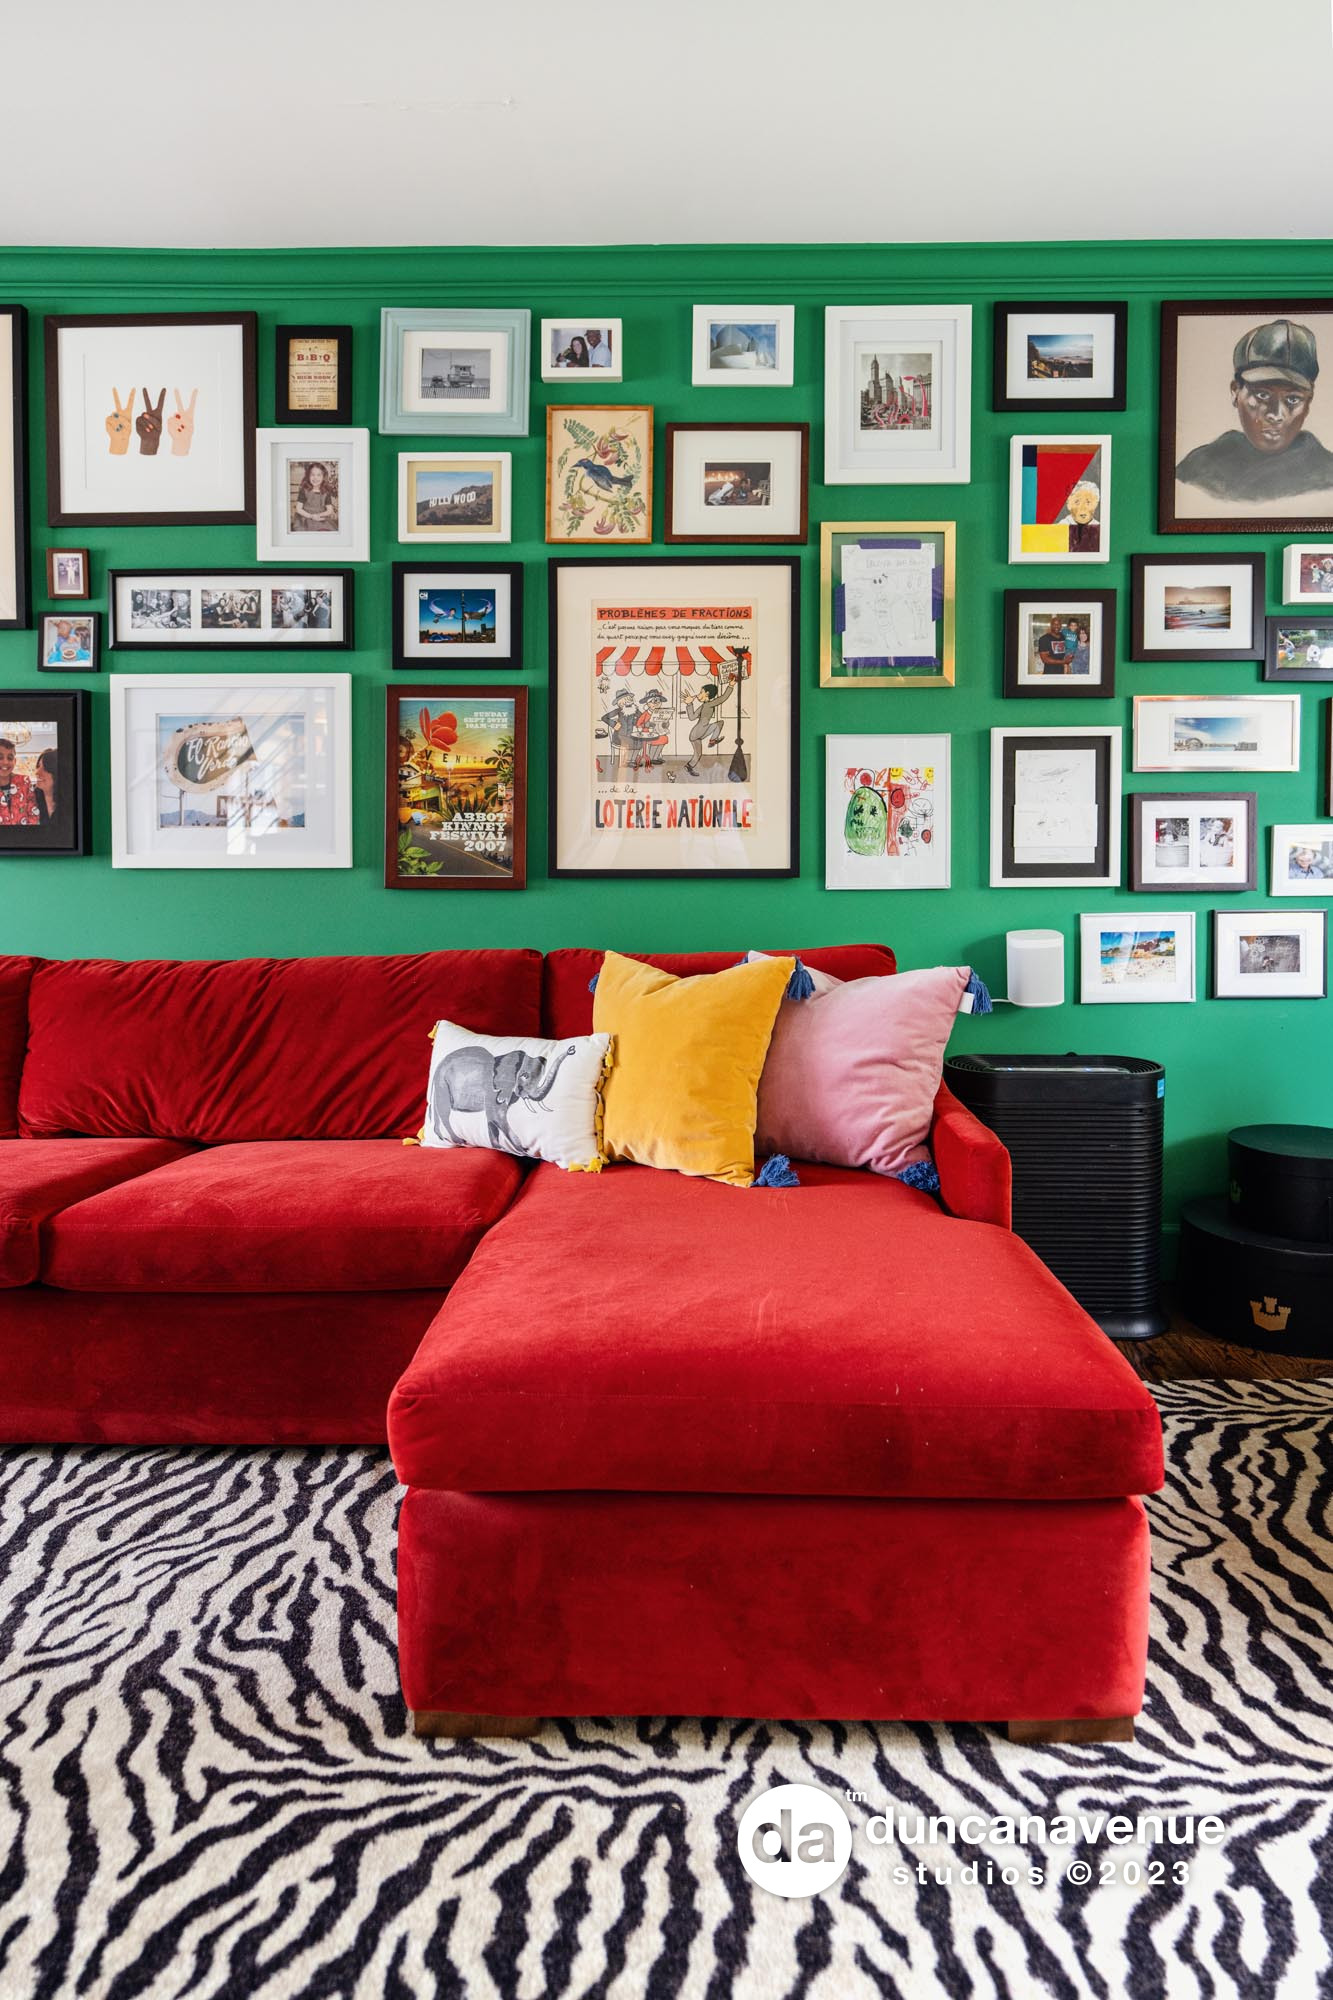 Experience the Bold and Vibrant Maximalist Style in Long Island's Latest Interior Design Project - A Photoshoot by Duncan Avenue Studios for Alluvion Media + Hudson Valley Style Magazine